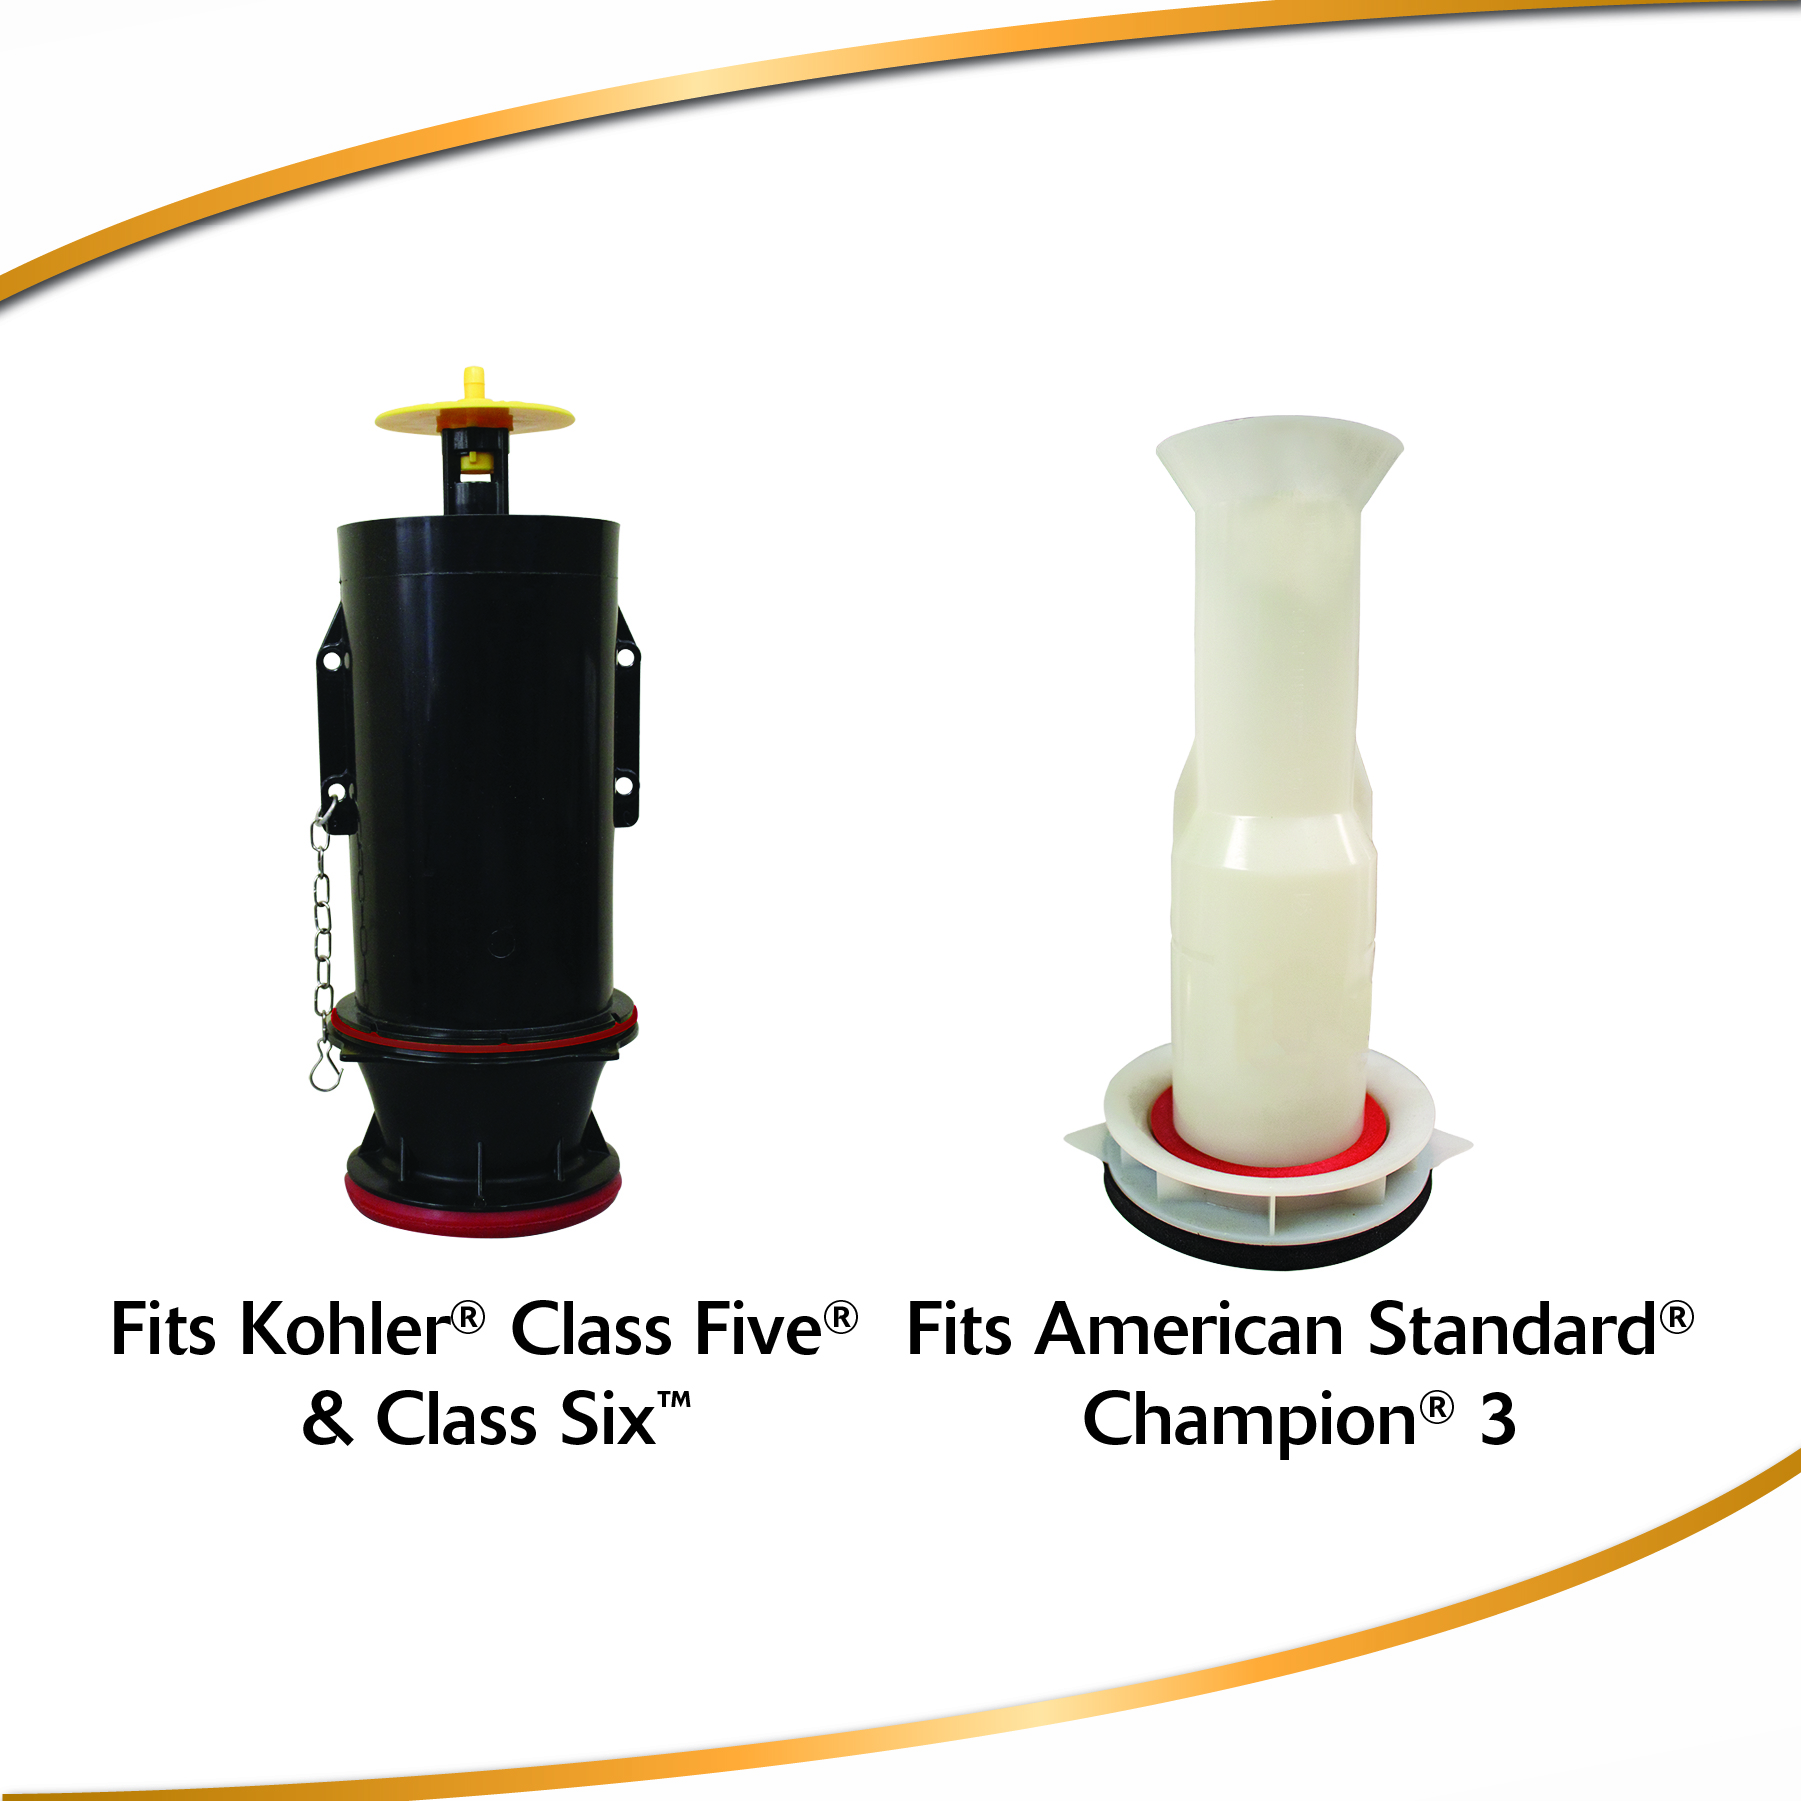 Fits Kohler Class five and six and American Standard Champion three